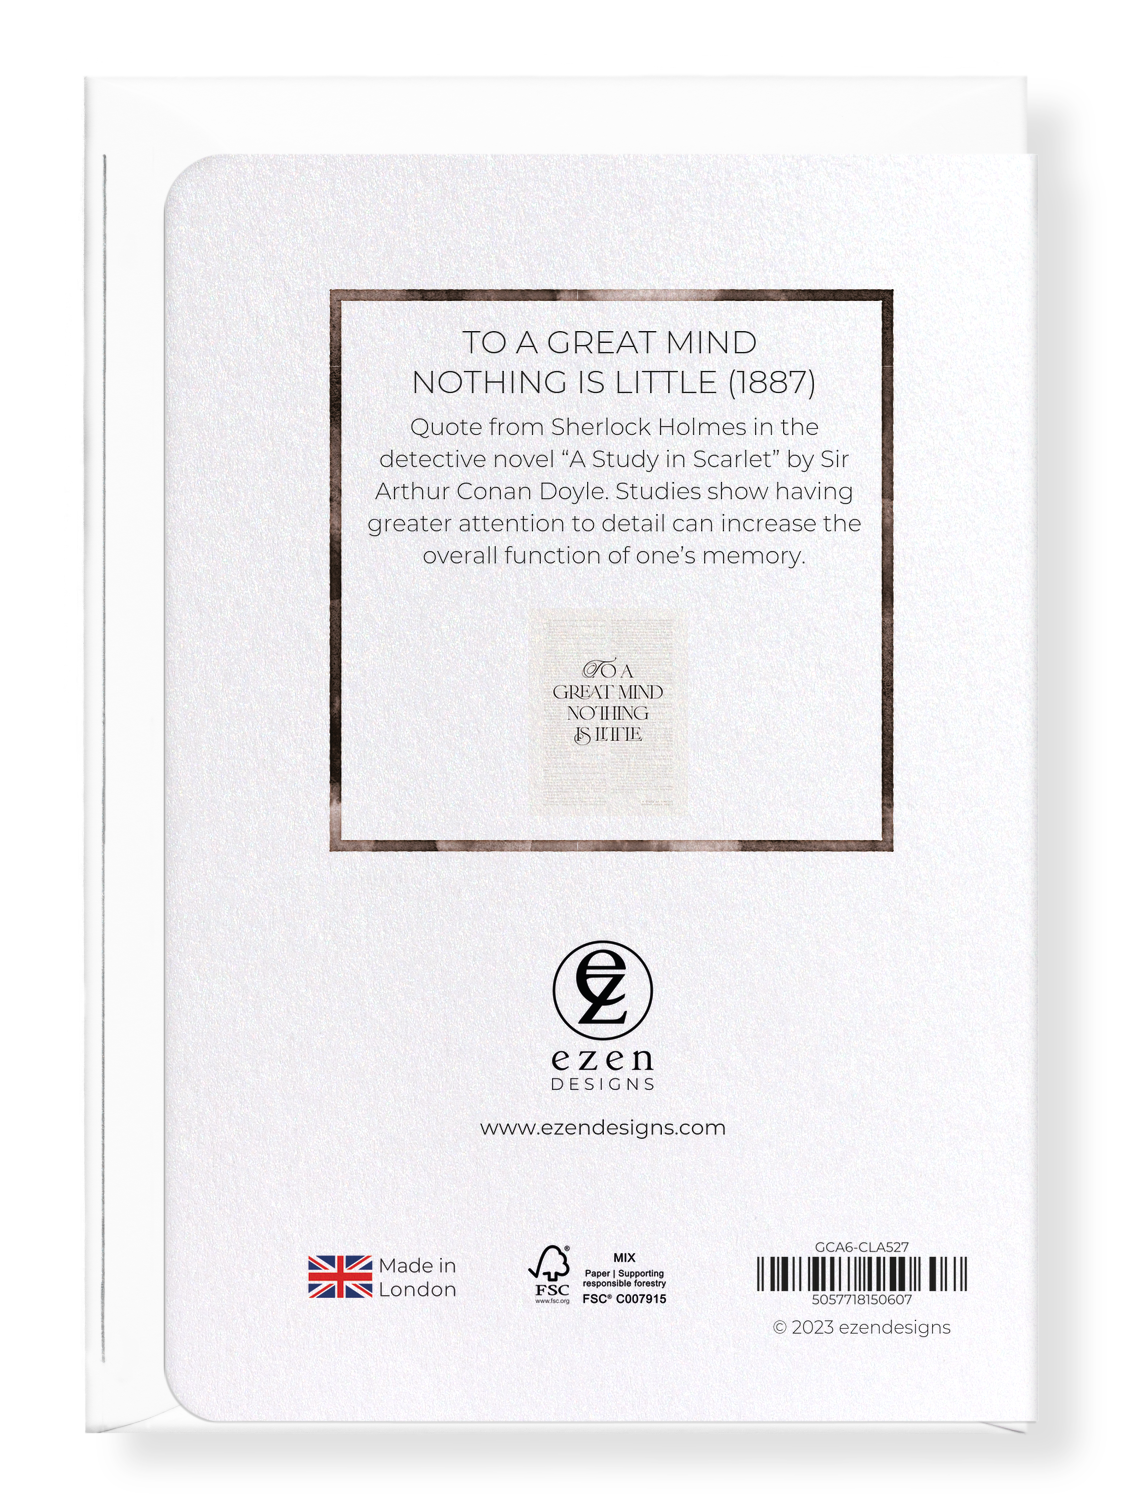 Ezen Designs - To a Great Mind Nothing is Little (1887) - Greeting Card - Back